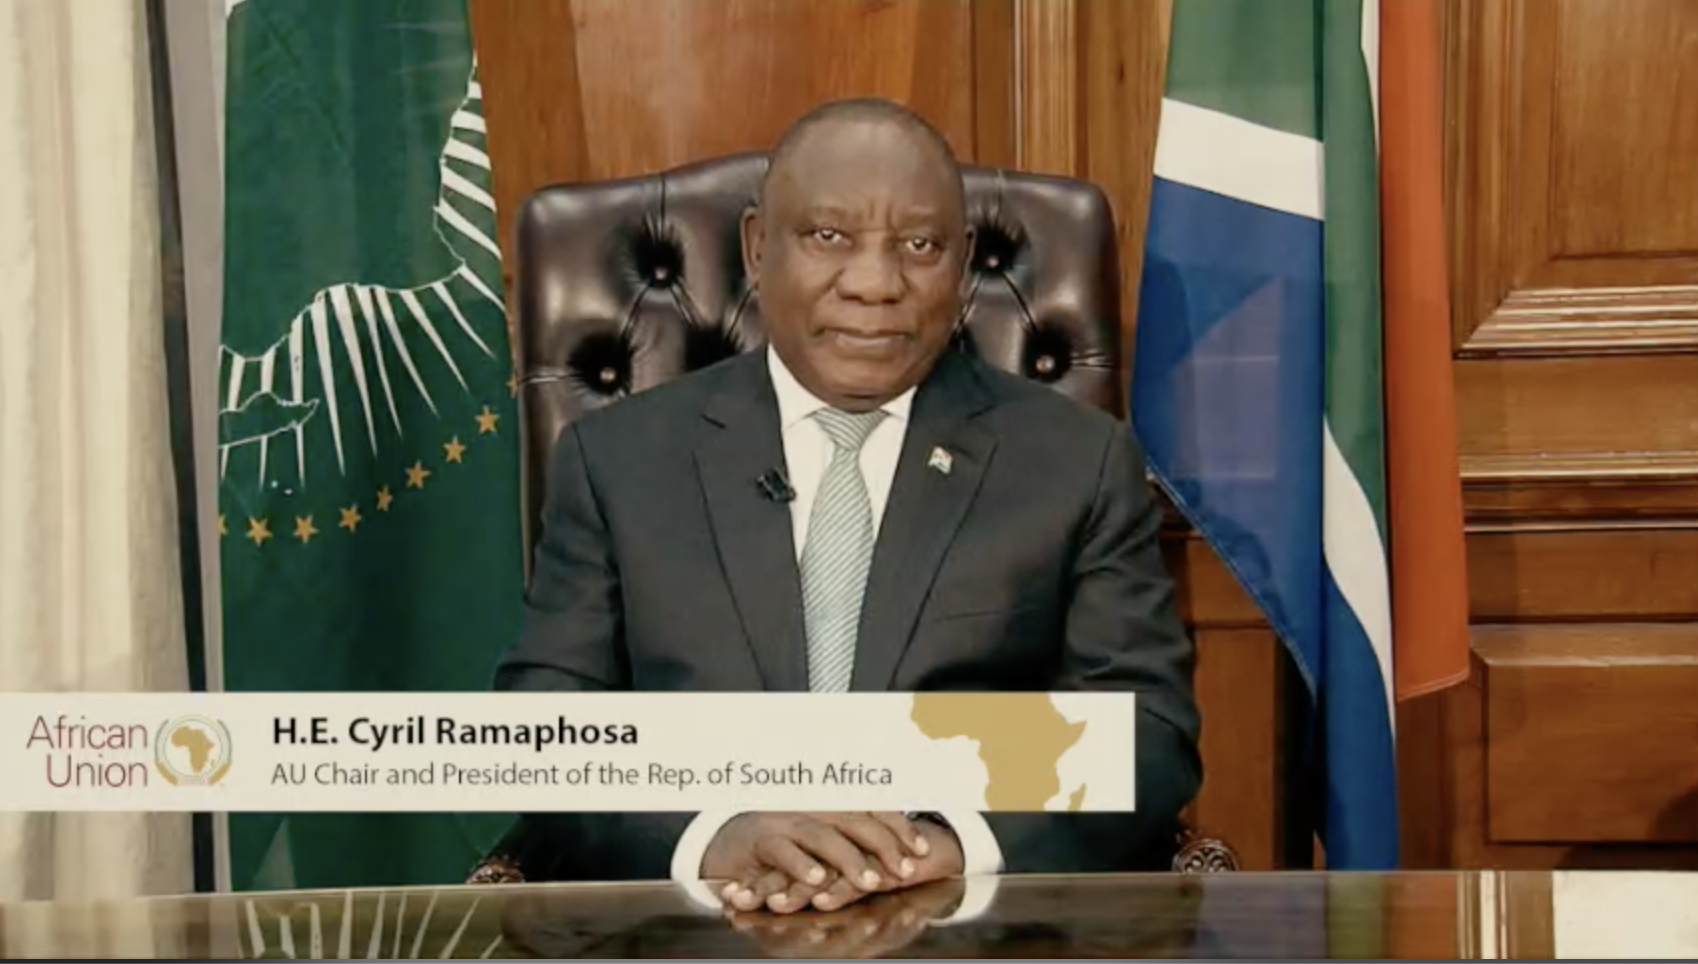 Statement Delivered On Behalf Of The Au Chairperson President Cyril Ramaphosa On The Occasion Of The Handover Ceremony Of The Afcfta Secretariat Union Africaine